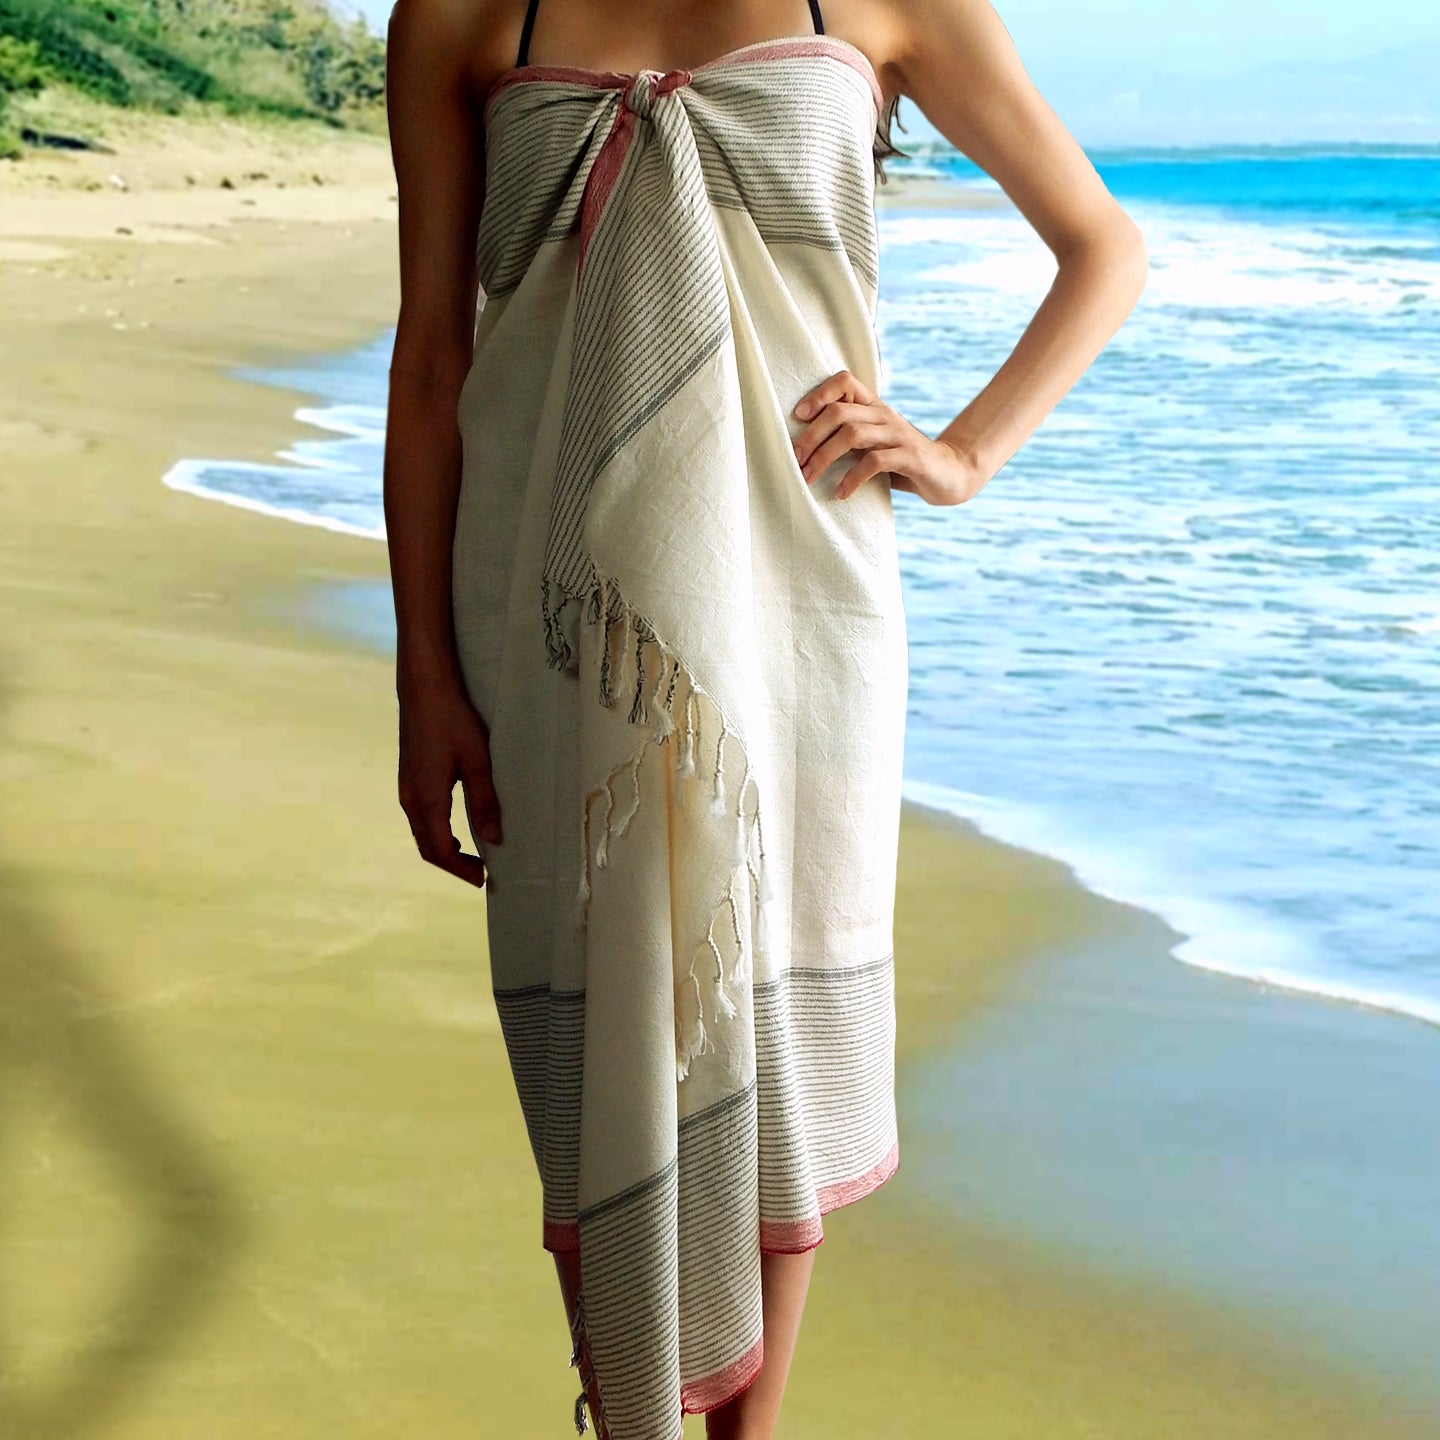 Authentic Turkish Towels for beach, Quiquattro more QuiQuattro bath and from –